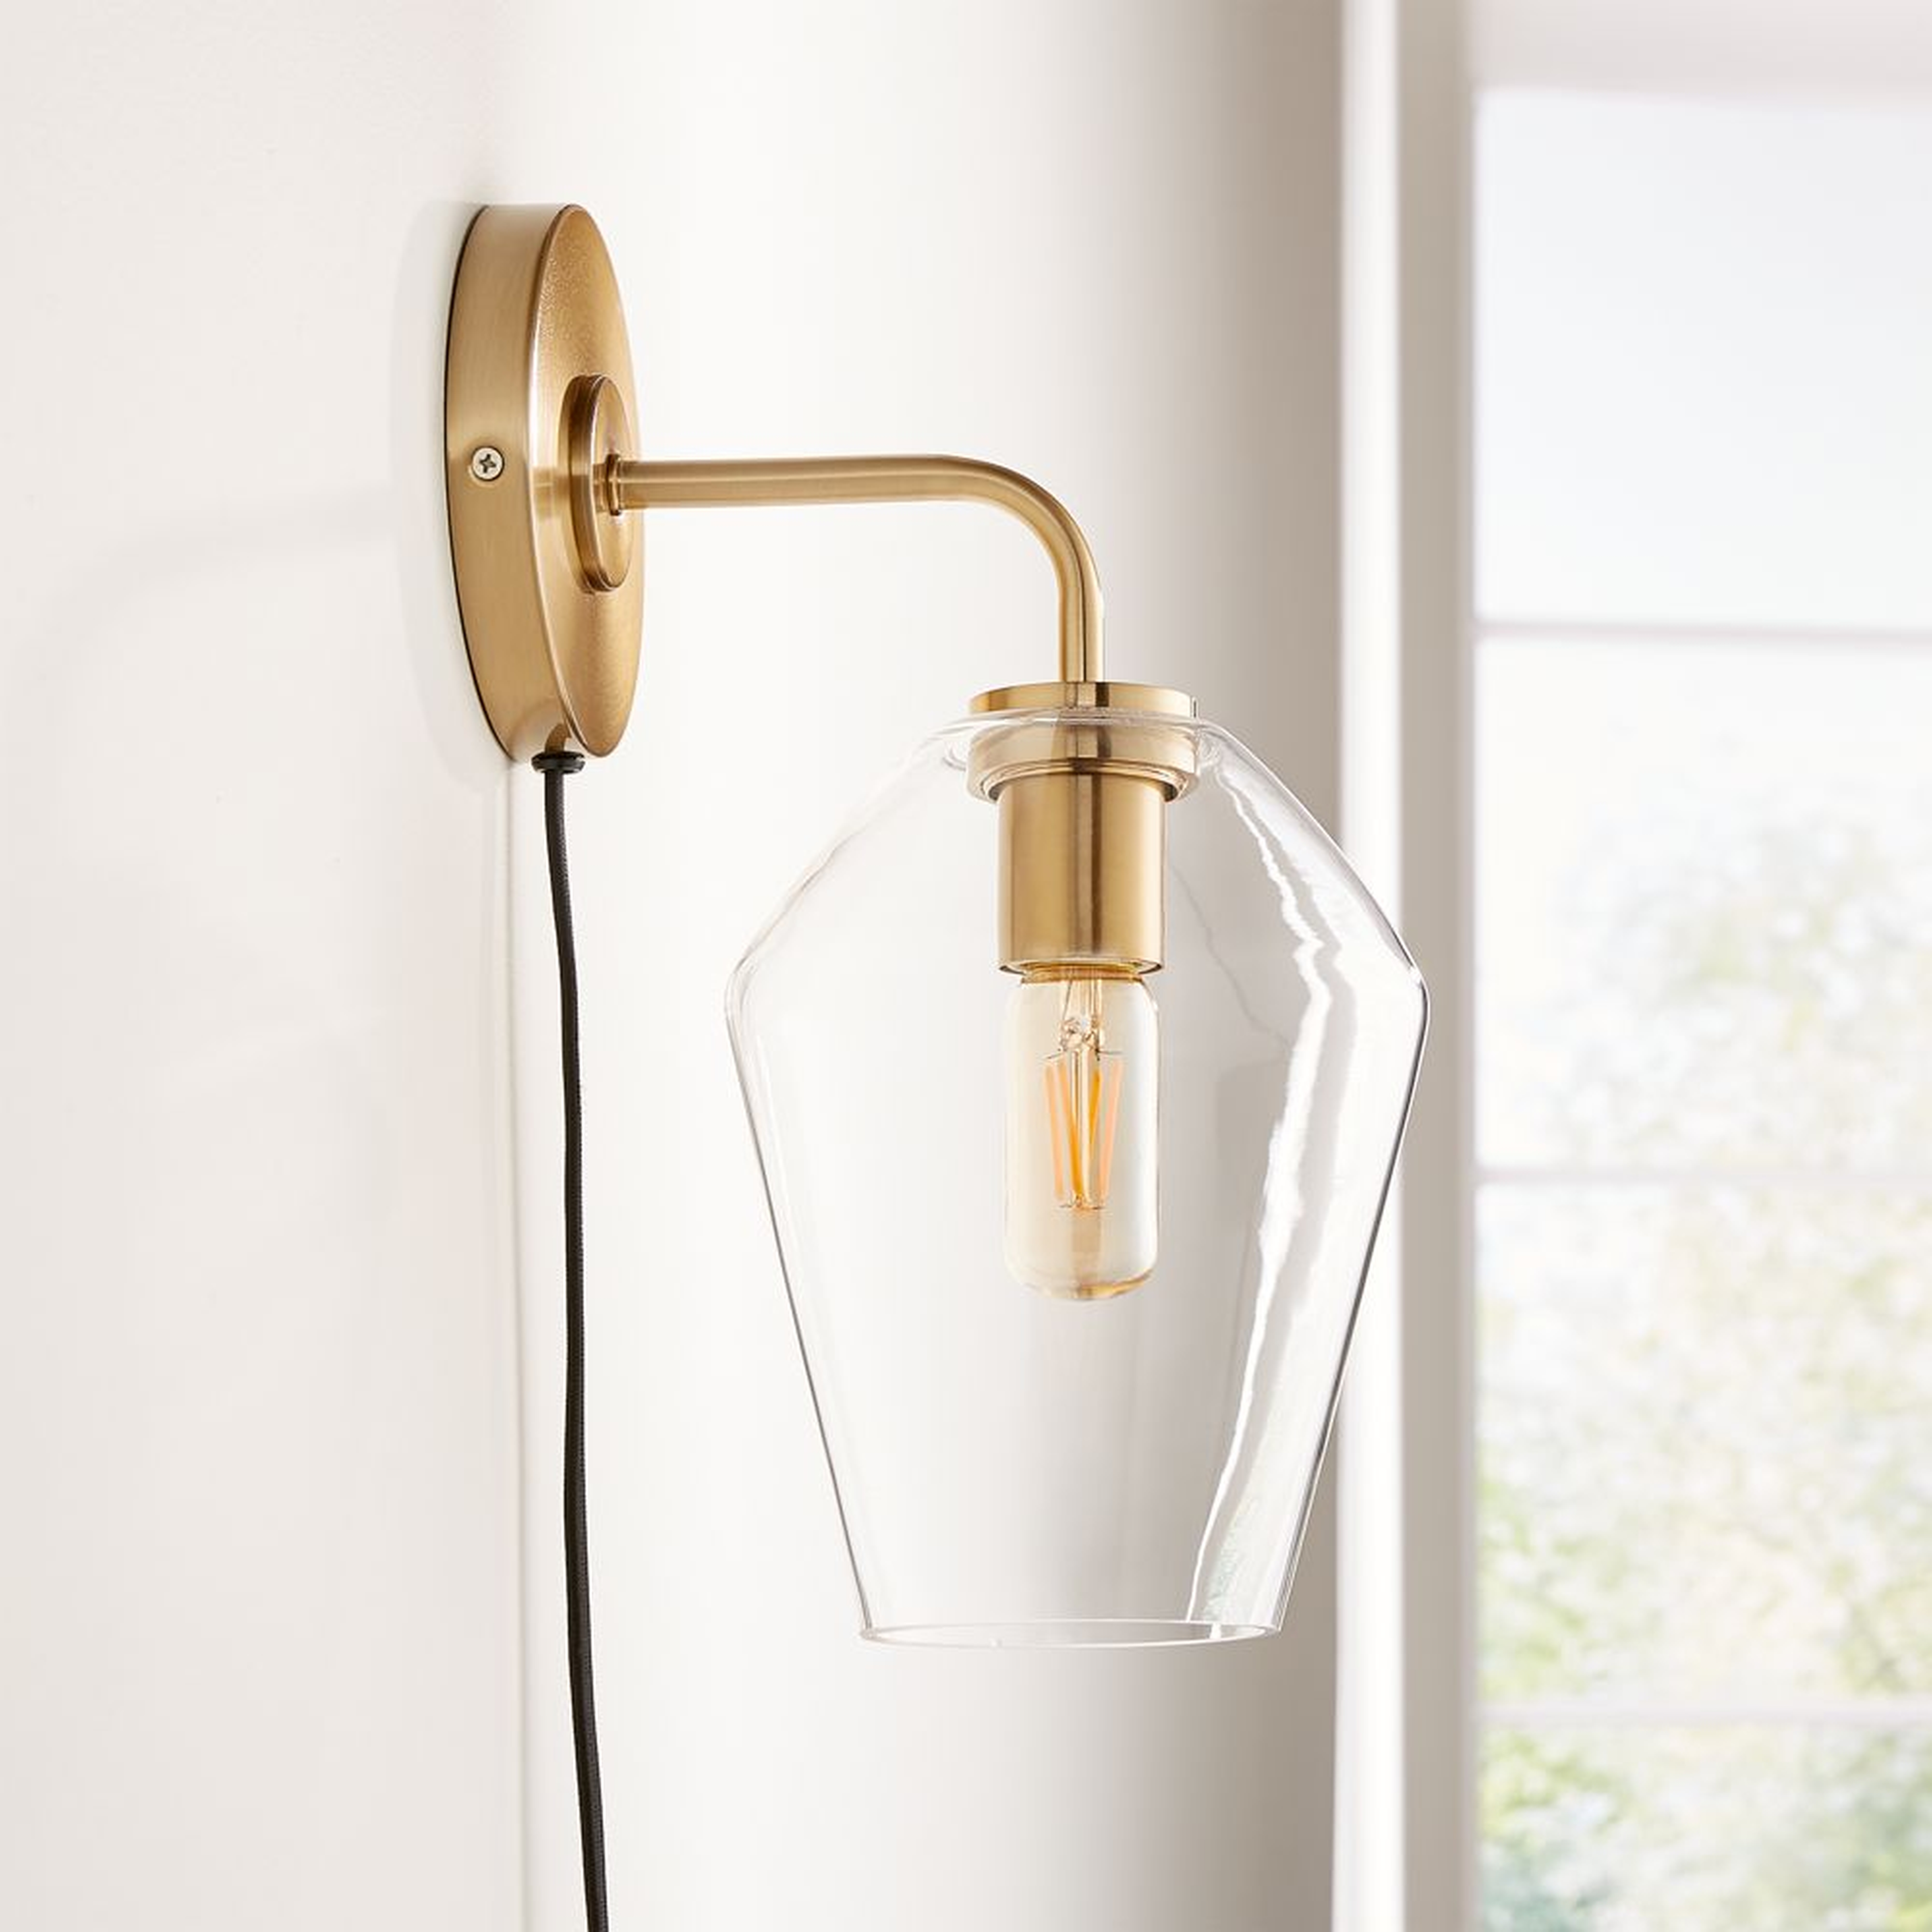 Arren Brass Plug In Wall Sconce Light with Clear Angled Shade - Crate and Barrel